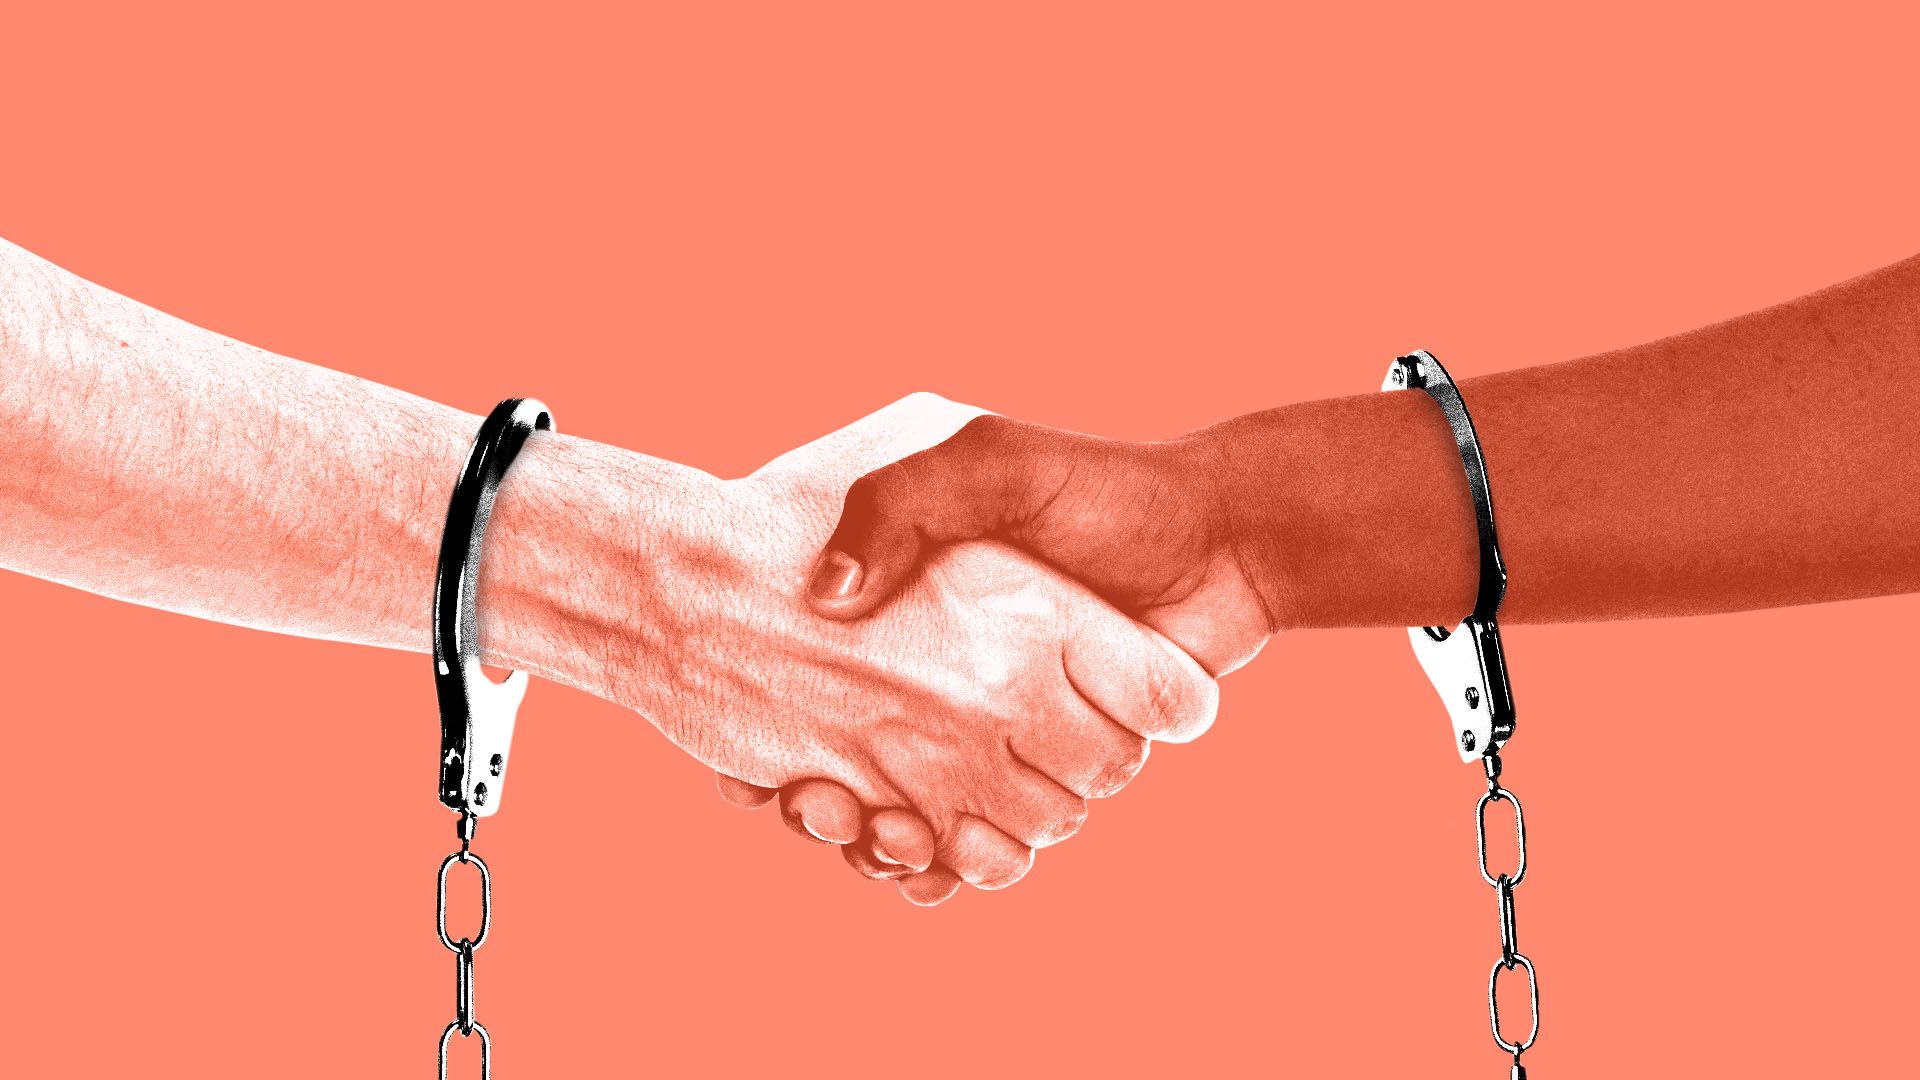 Illustration of two people shaking hands while wearing handcuffs